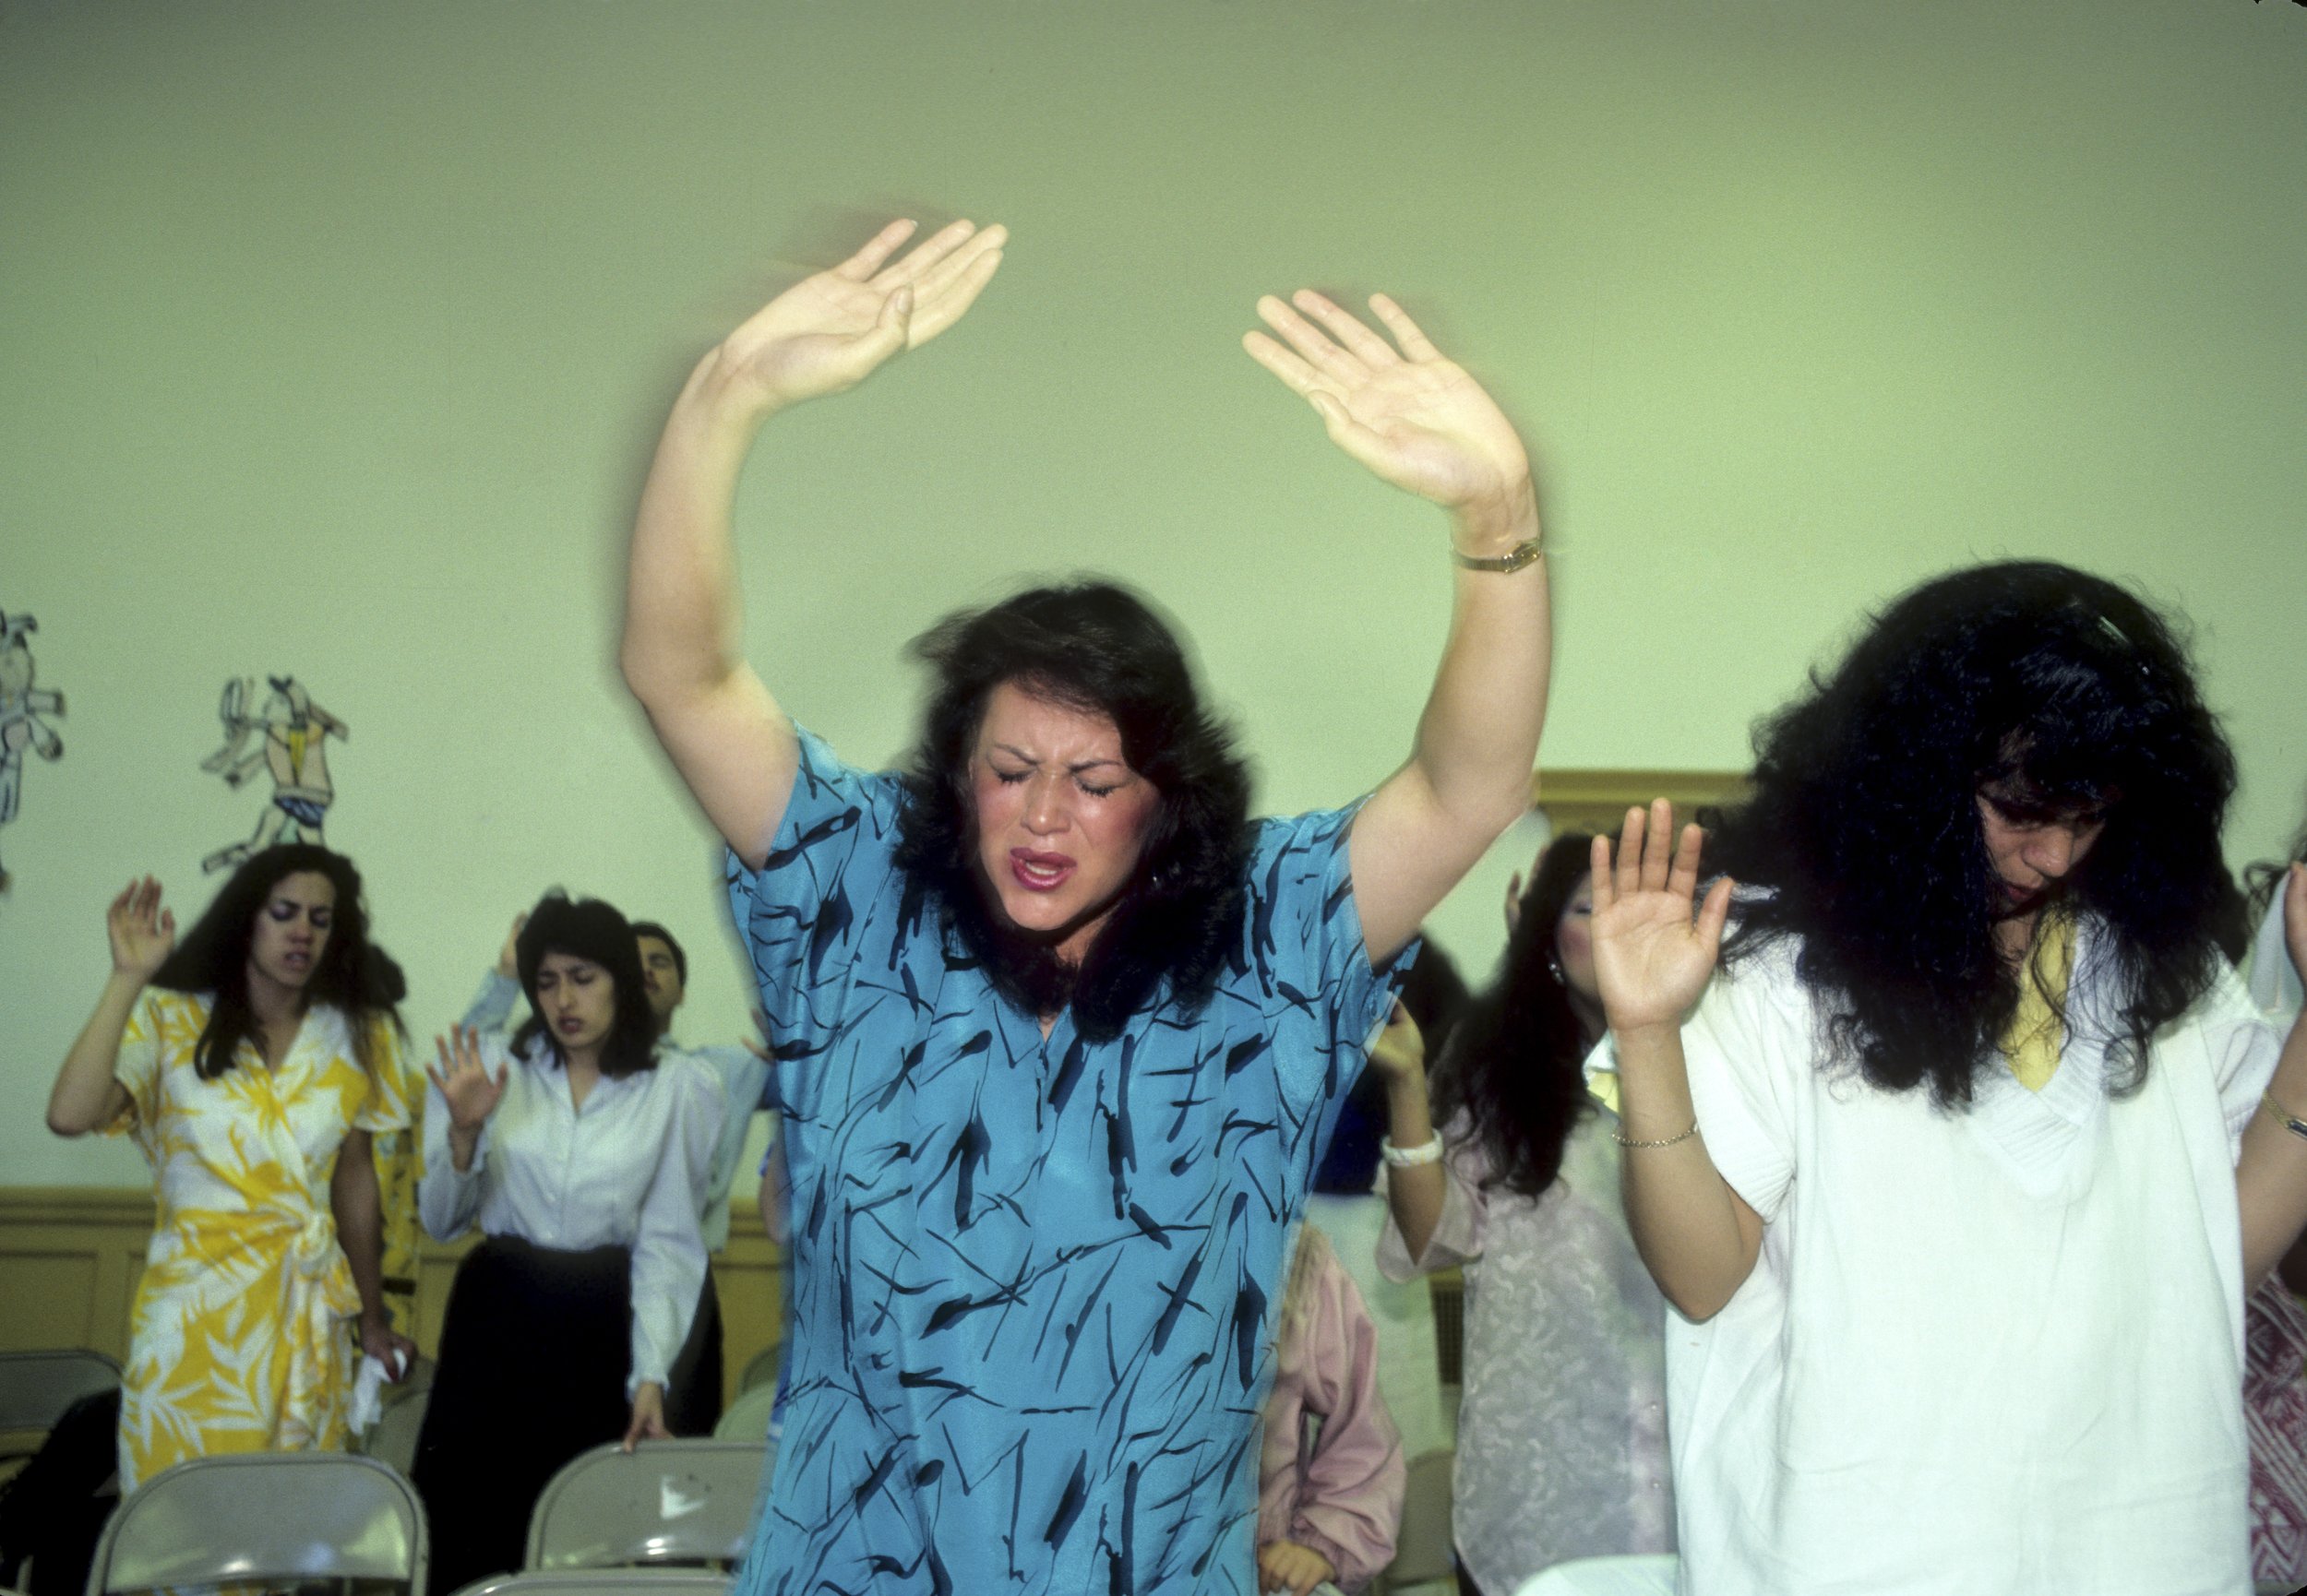  Latinx immigrants worshipping in one of San Francisco’s Mission District storefront churches. 1986 